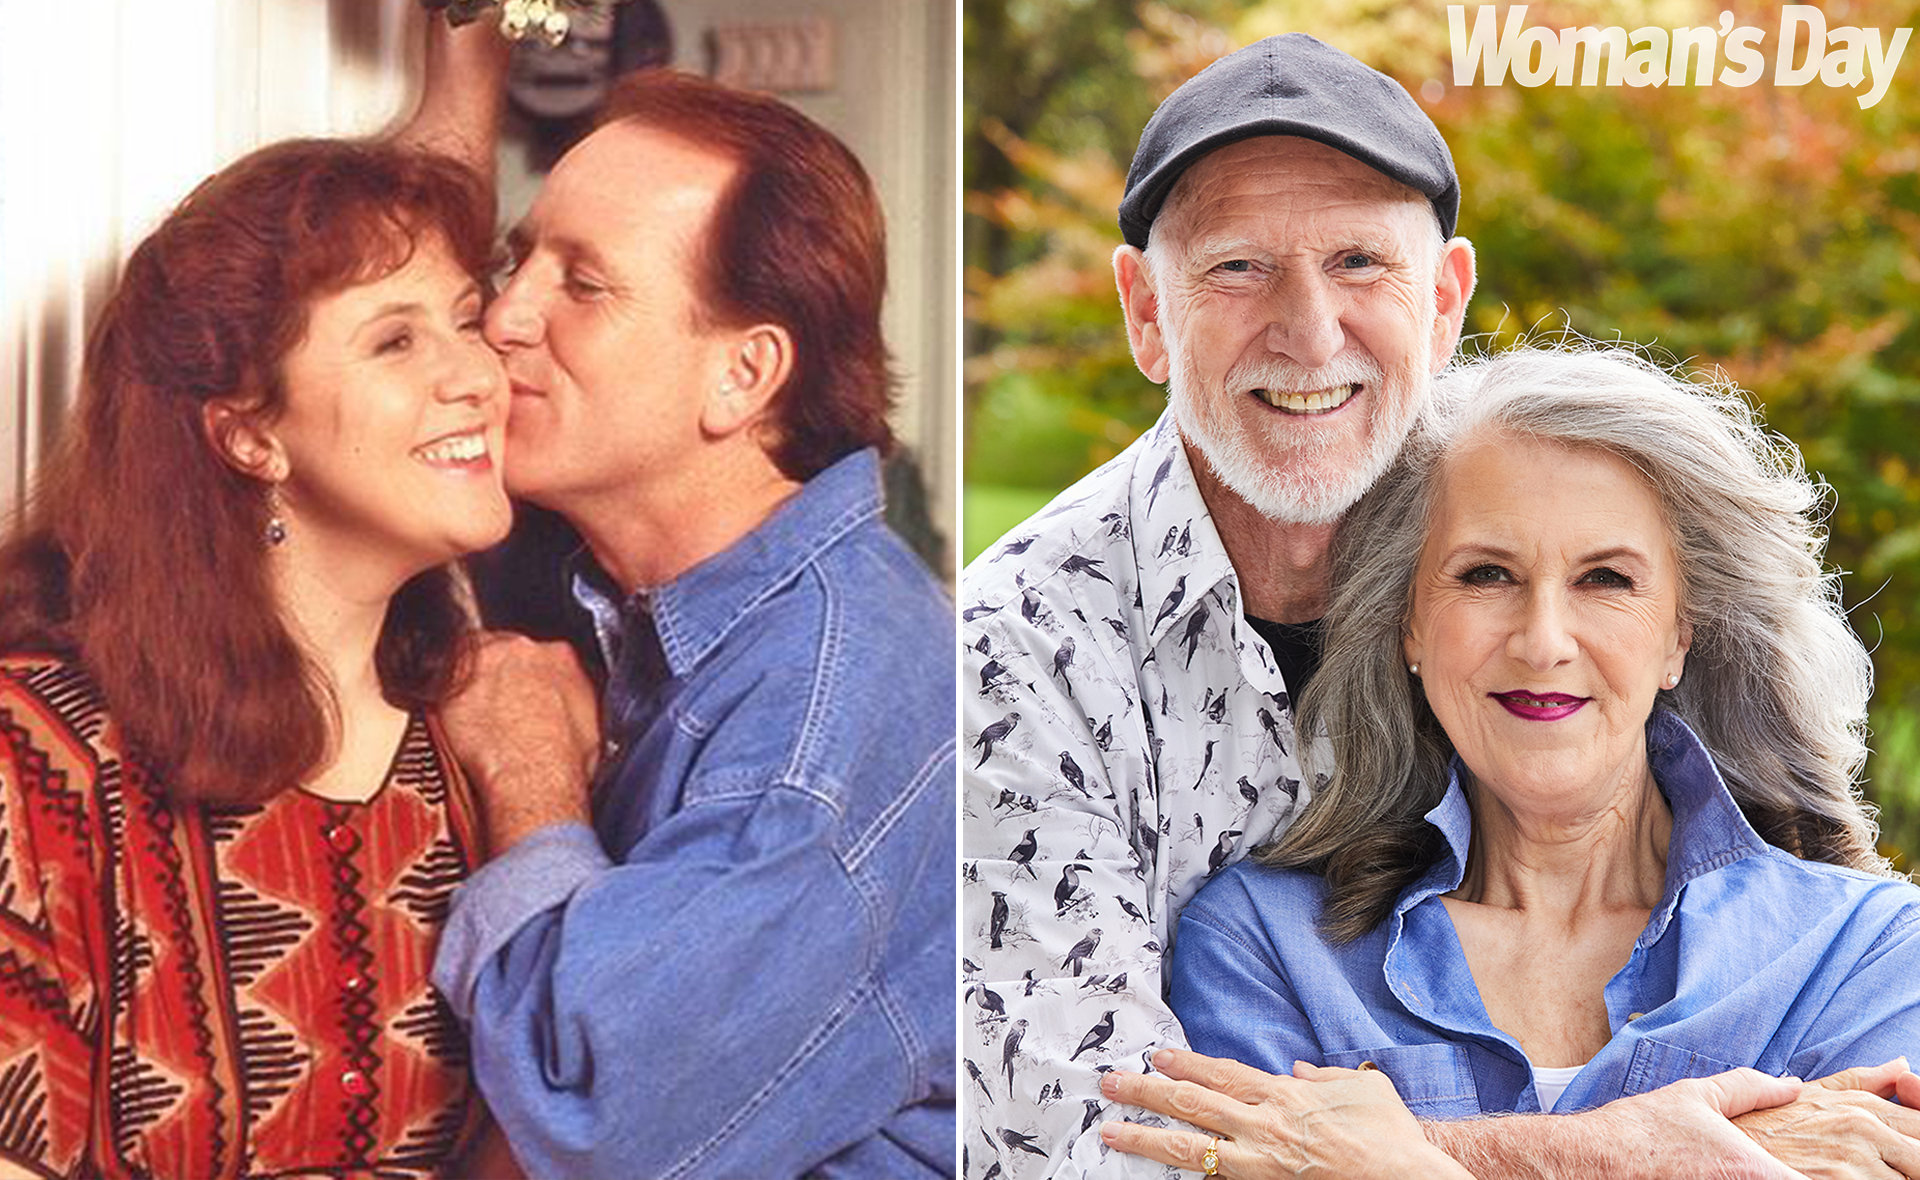 EXCLUSIVE: How Debra Lawrance and Dennis Coard – Home And Away’s Pippa and Michael Ross – have made their marriage last 30 years